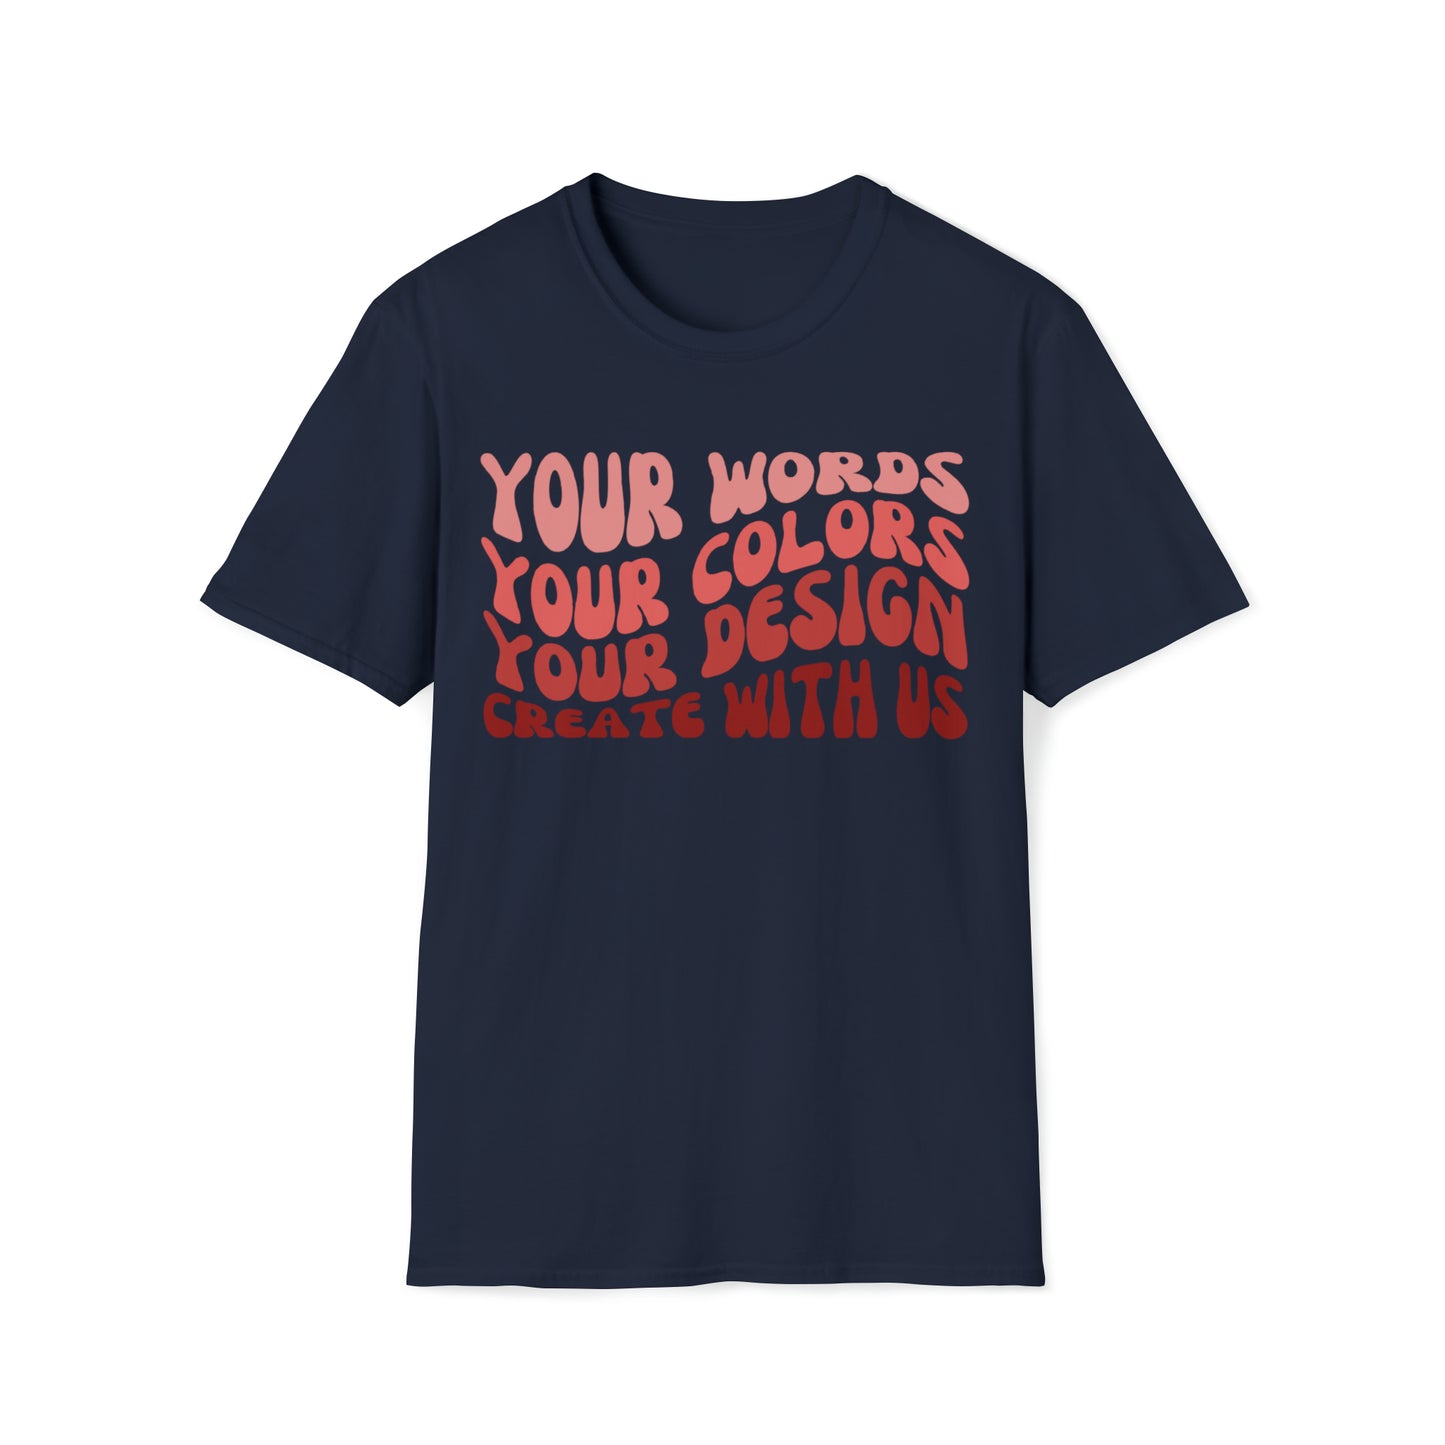 Yours Words, Your Colors, Your Design, Create With Us -  Unisex Softstyle T-Shirt